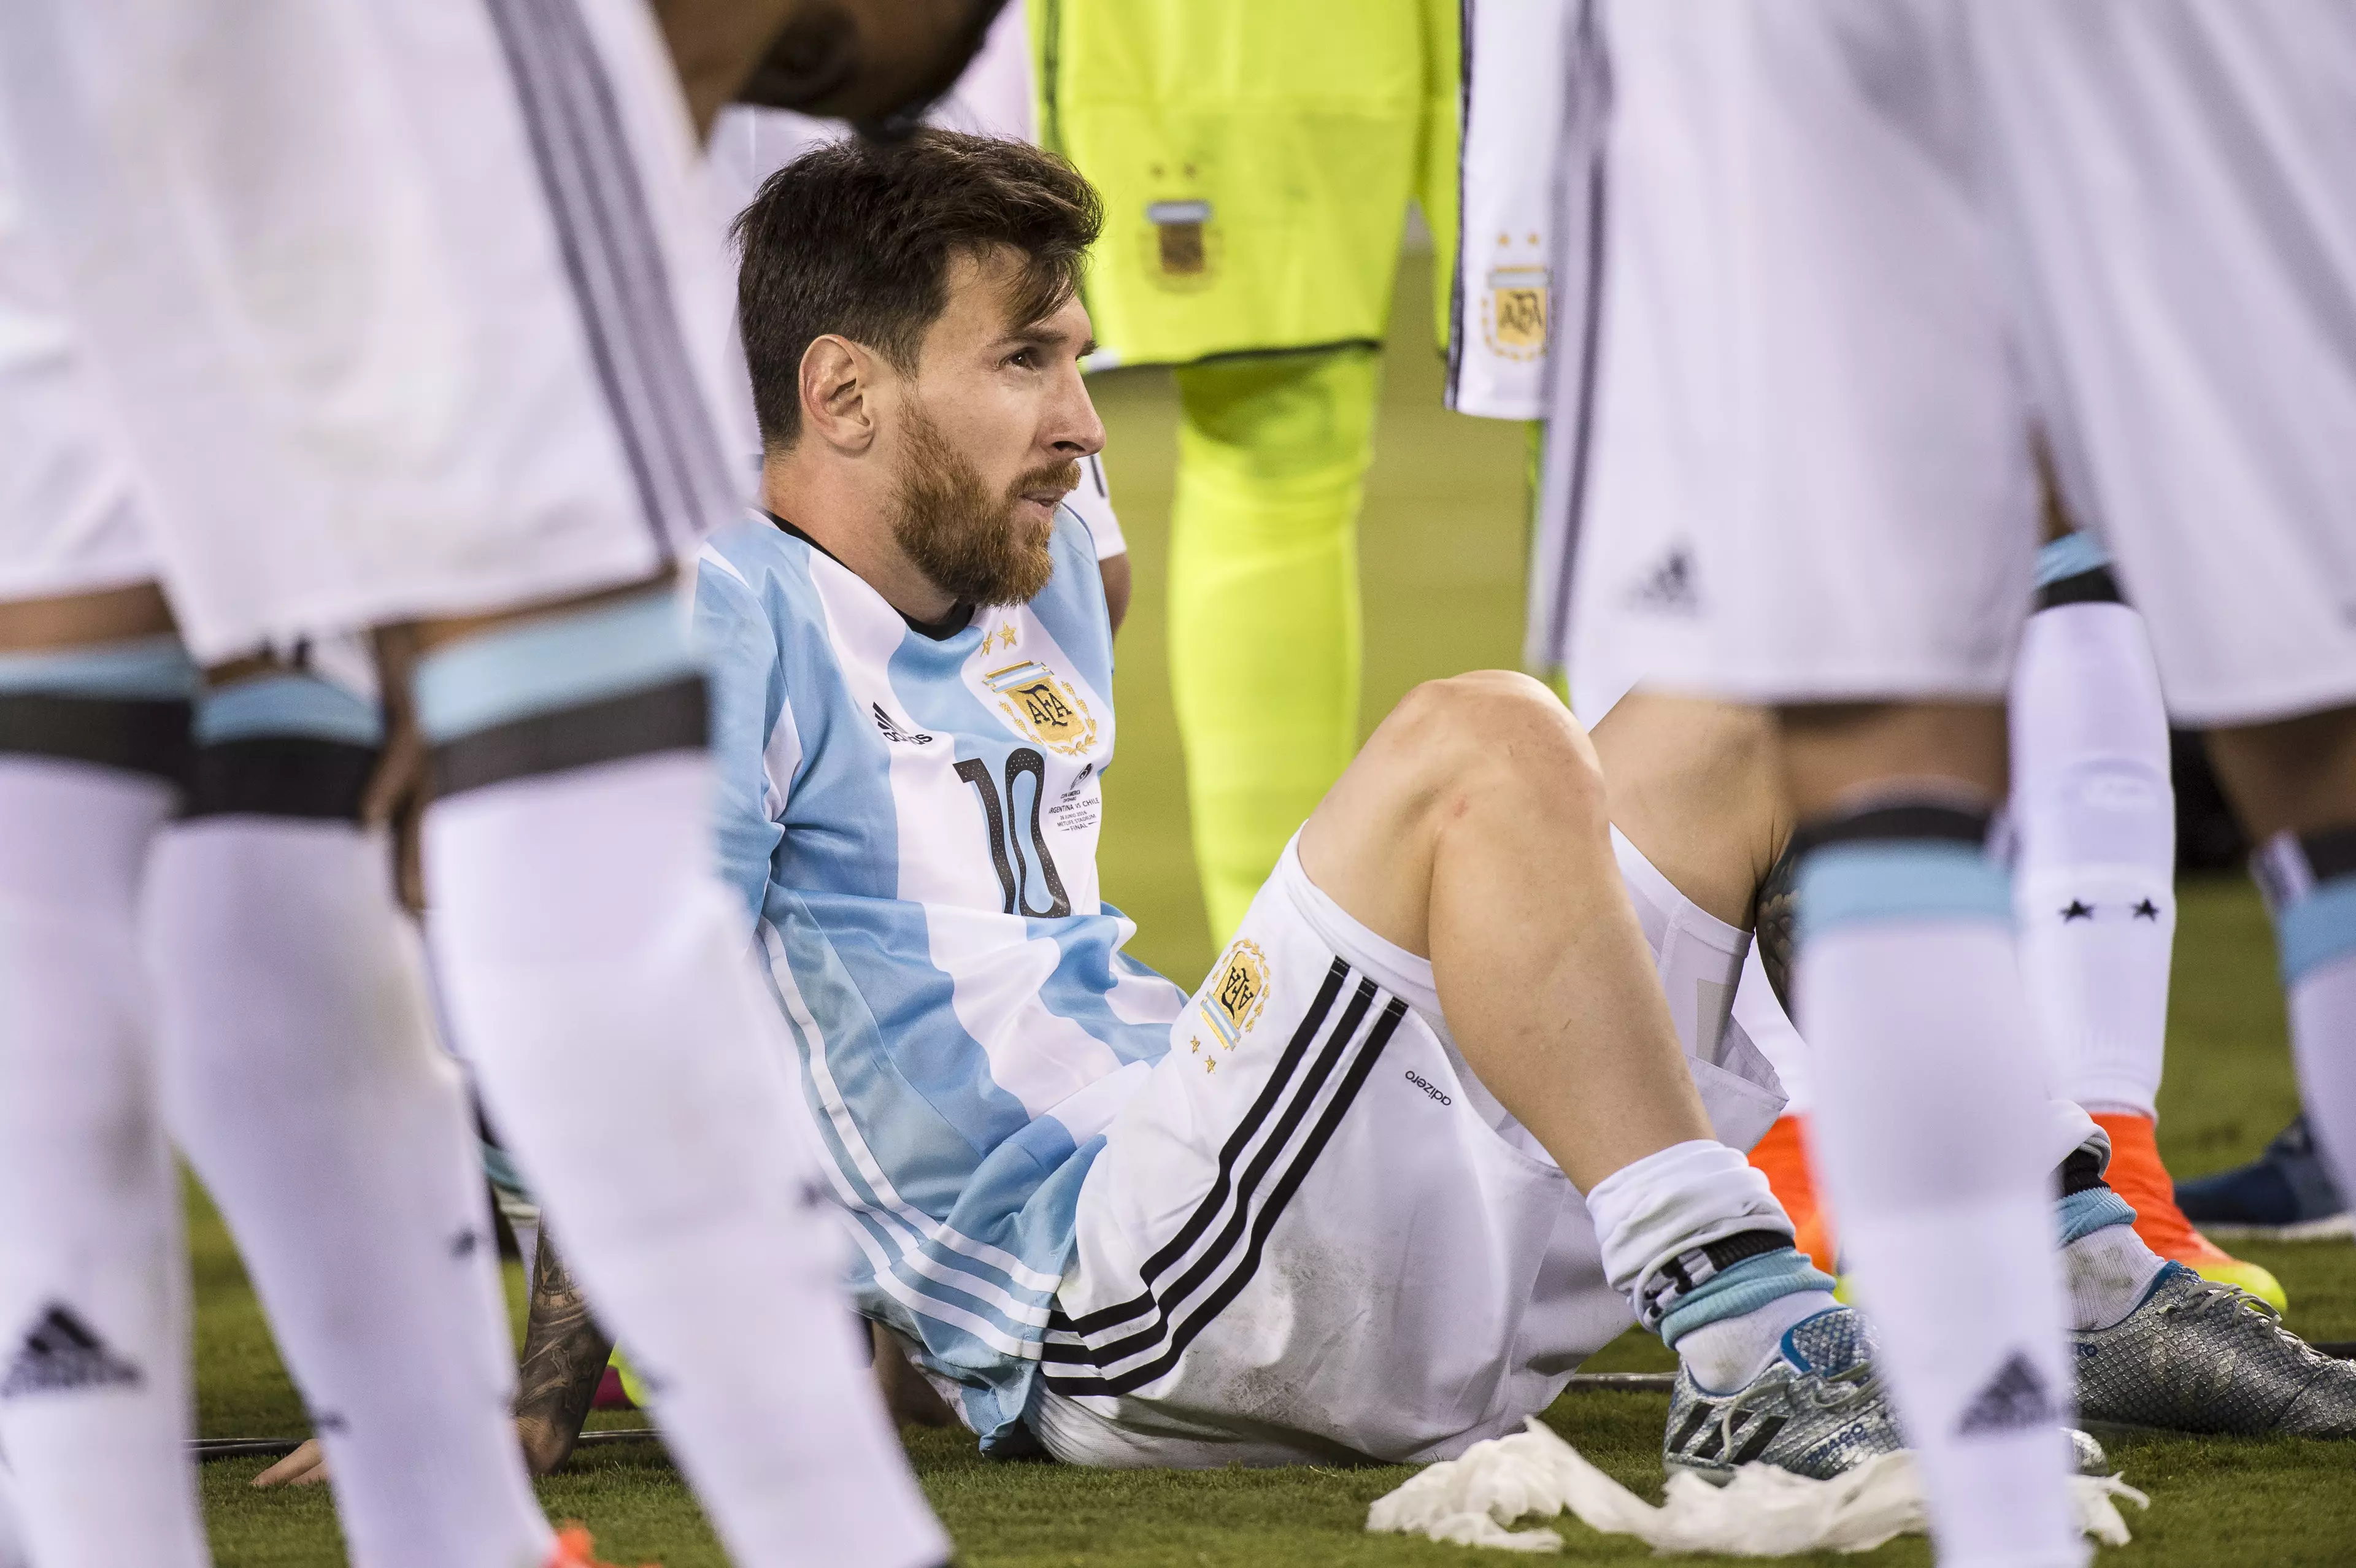 Copa America final defeats weighed heavy on Messi and he briefly retired from international football. Image: PA Images